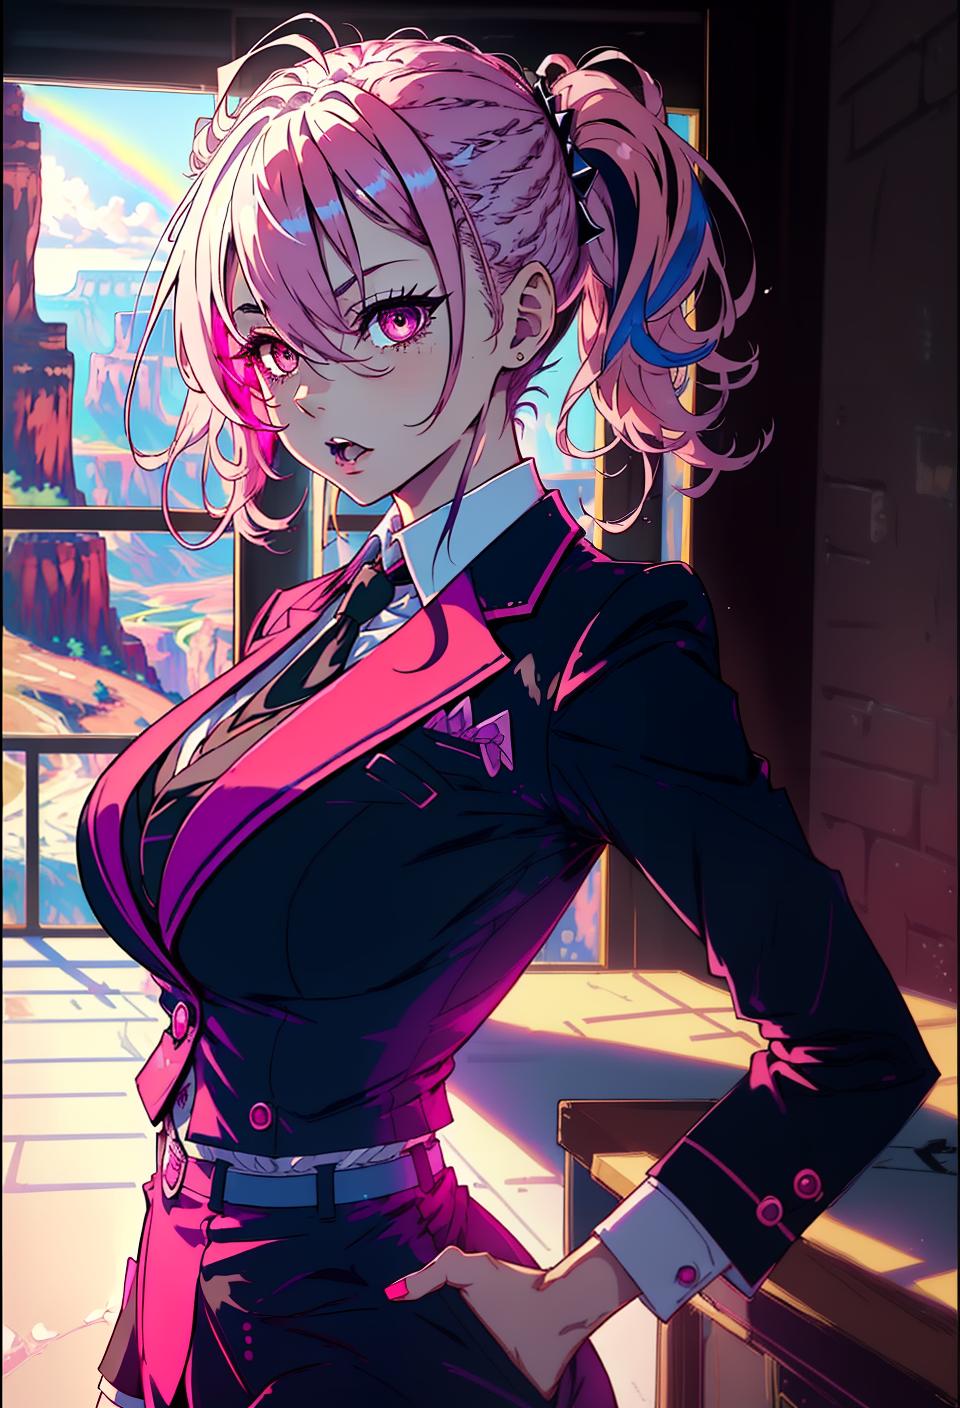  ((trending, highres, masterpiece, cinematic shot)), 1girl, mature, female business attire, large, Grand Canyon scene, short spiked pink hair, twintails hairstyle,  rainbow-colored eyes, psychopath, crazy personality, smug expression, very pale skin, chaotic, energetic